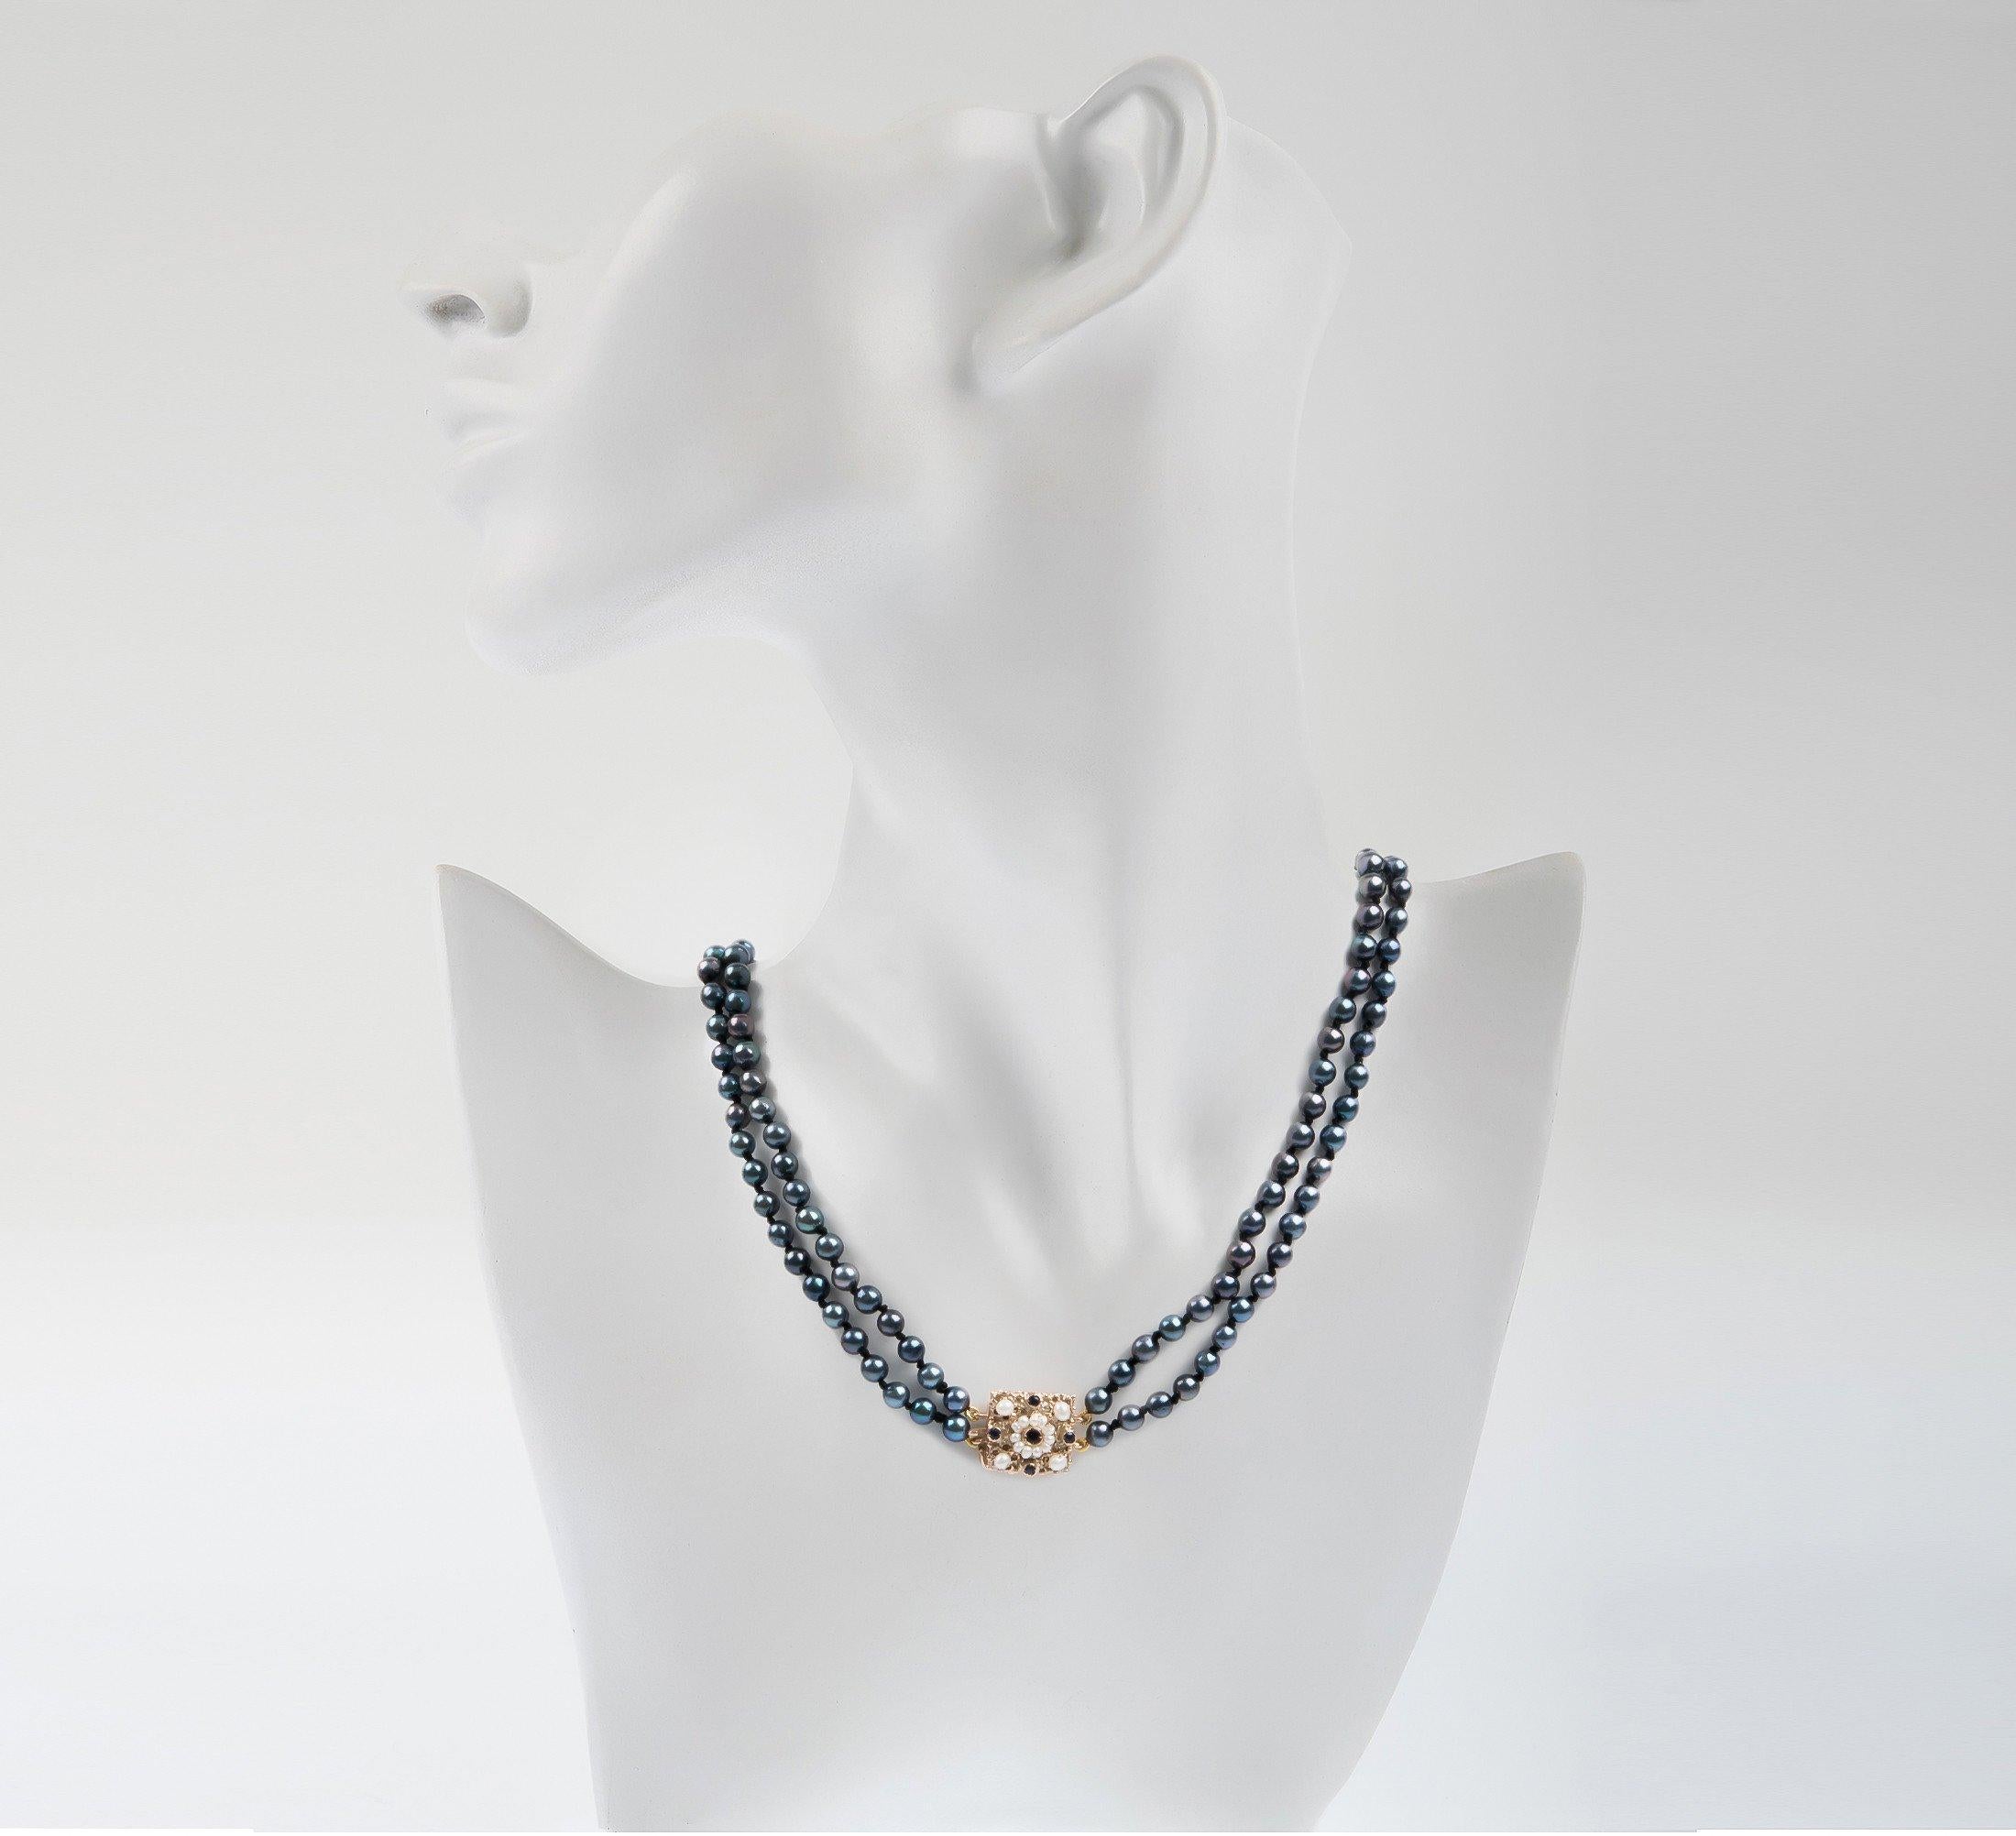 This breathtaking necklace, comprising of over one hundred pearls, with a fabulous handcrafted floral clasp set with tiny seed pearls. The pearls are round and well matched, measuring 4.5mm with beautiful blue and grey hues.

SPECIFICATION
Weight